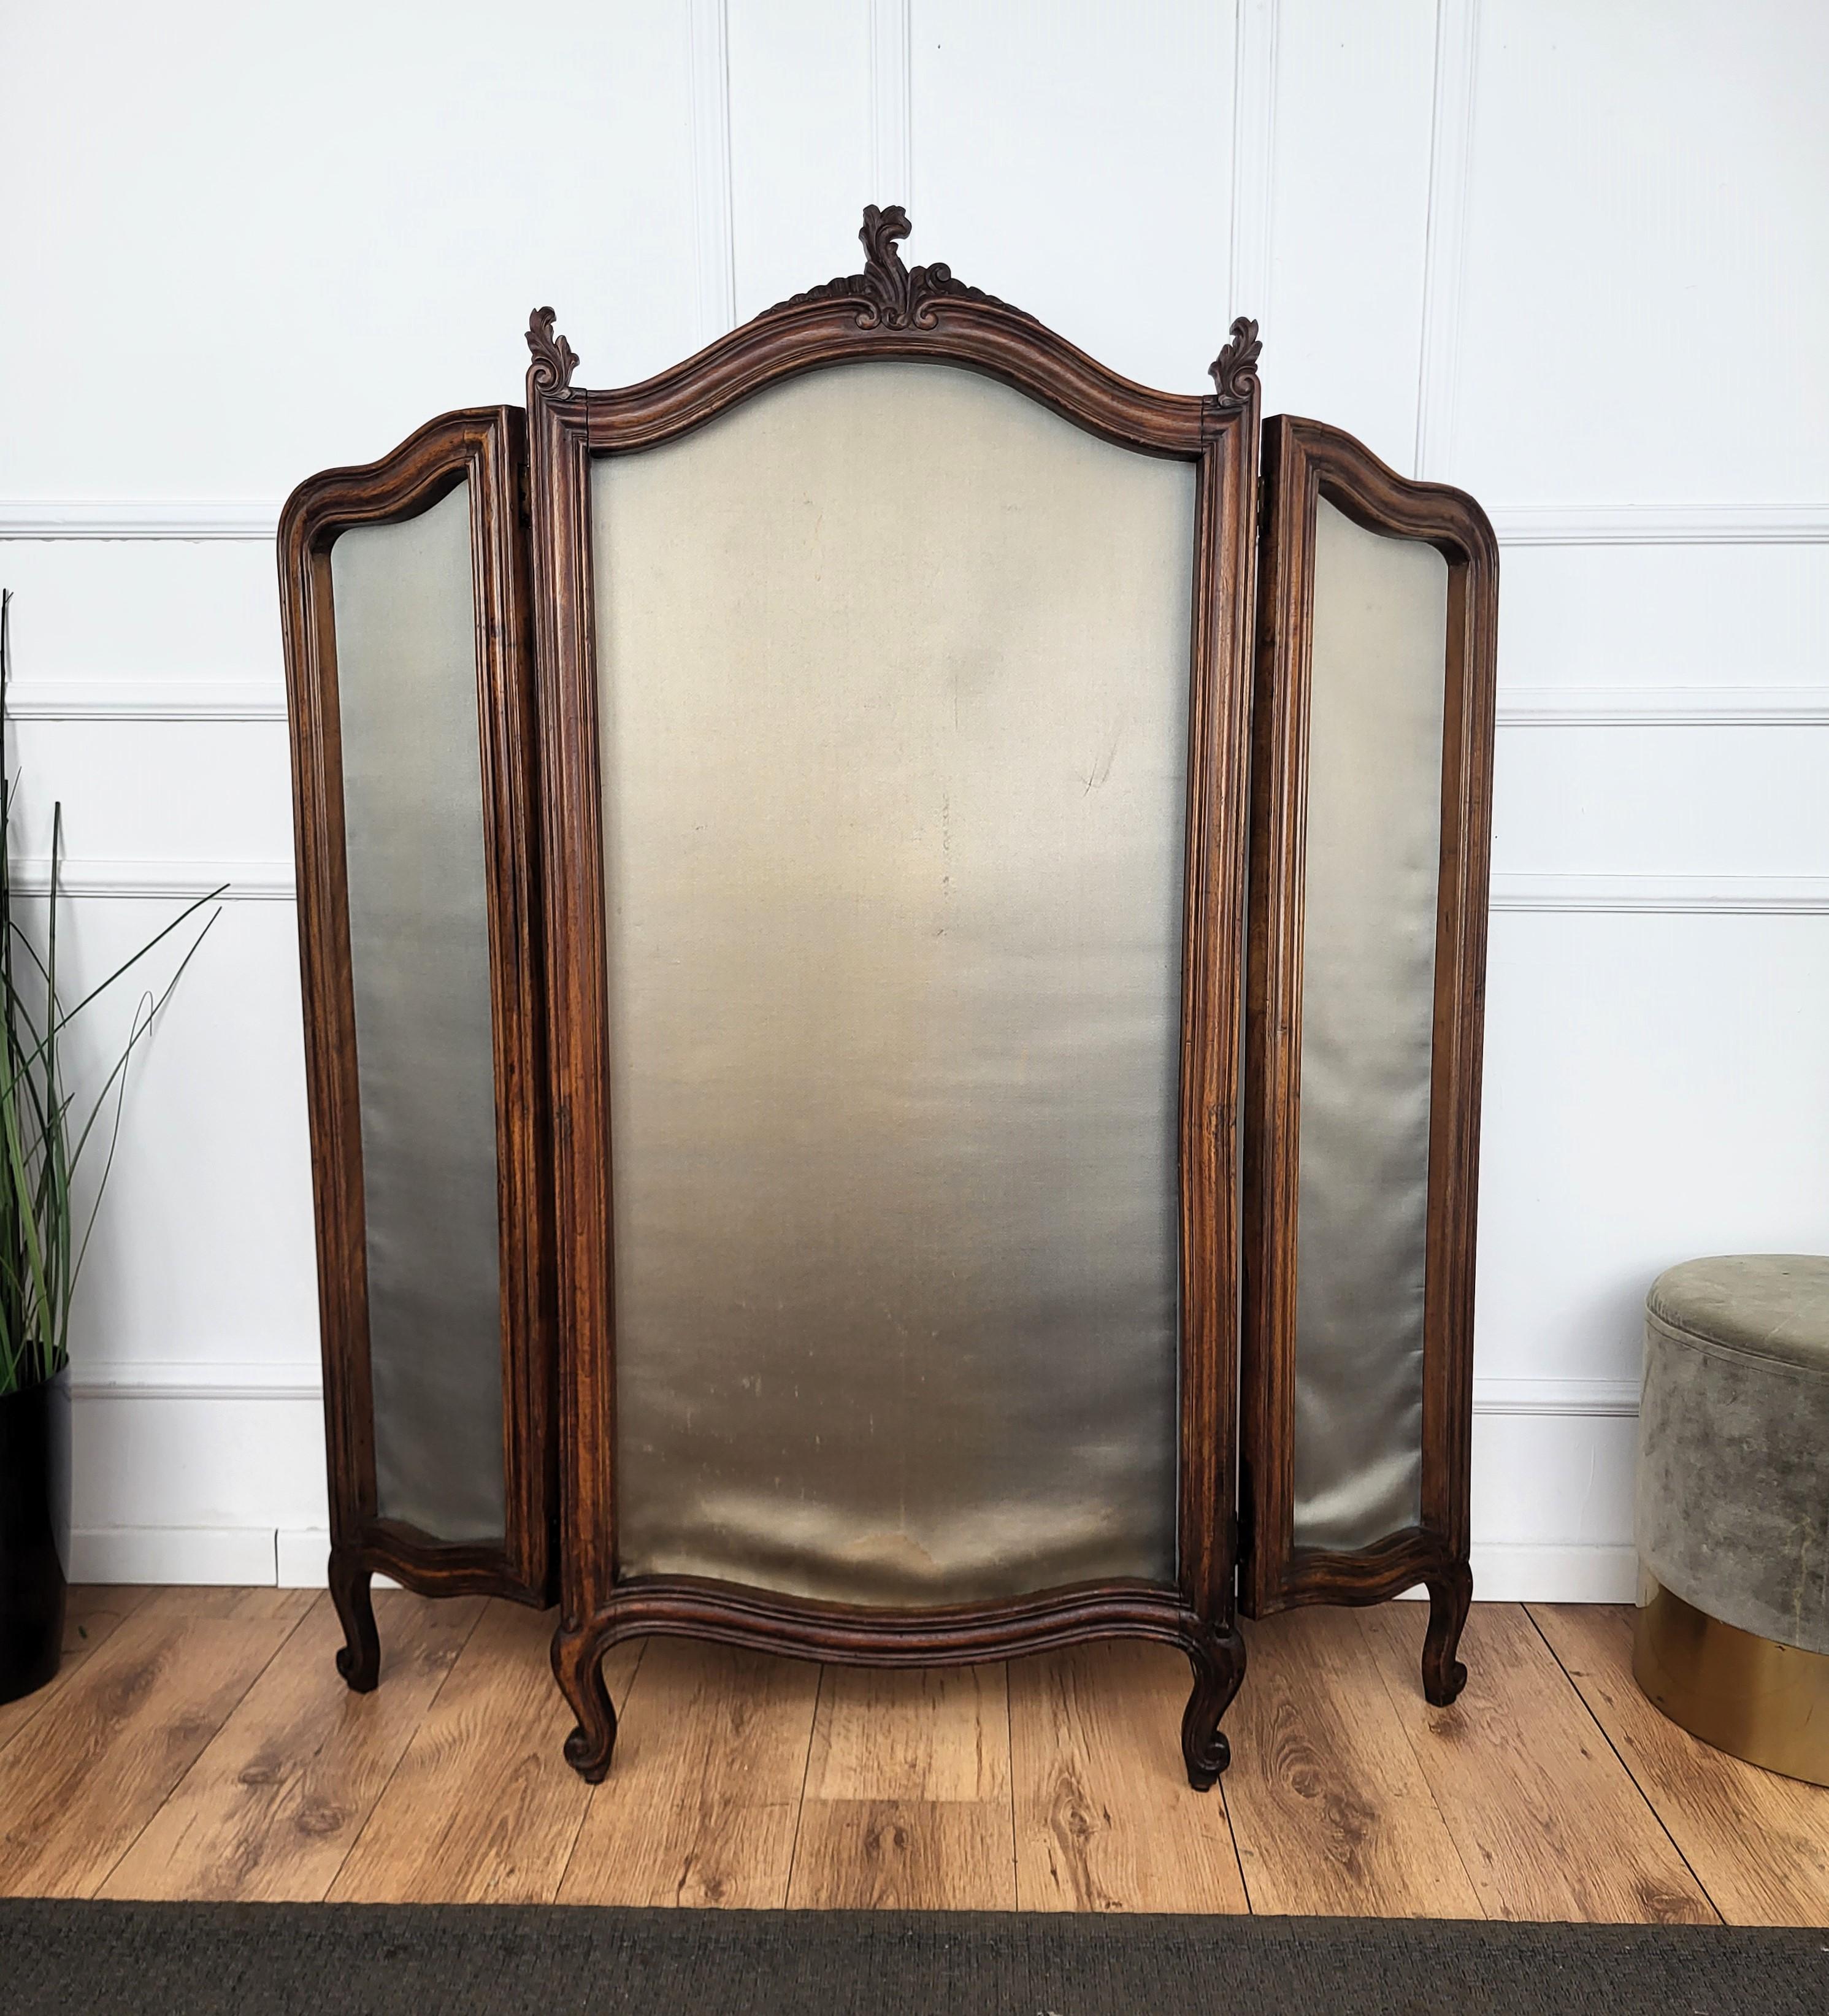 Beautiful classic Italian antique room divider or screen made by 3 greatly carved and detailed wood panels with fabric center. We didn't change the fabric center that can be personalized with either a simple full color choice or a more decorative